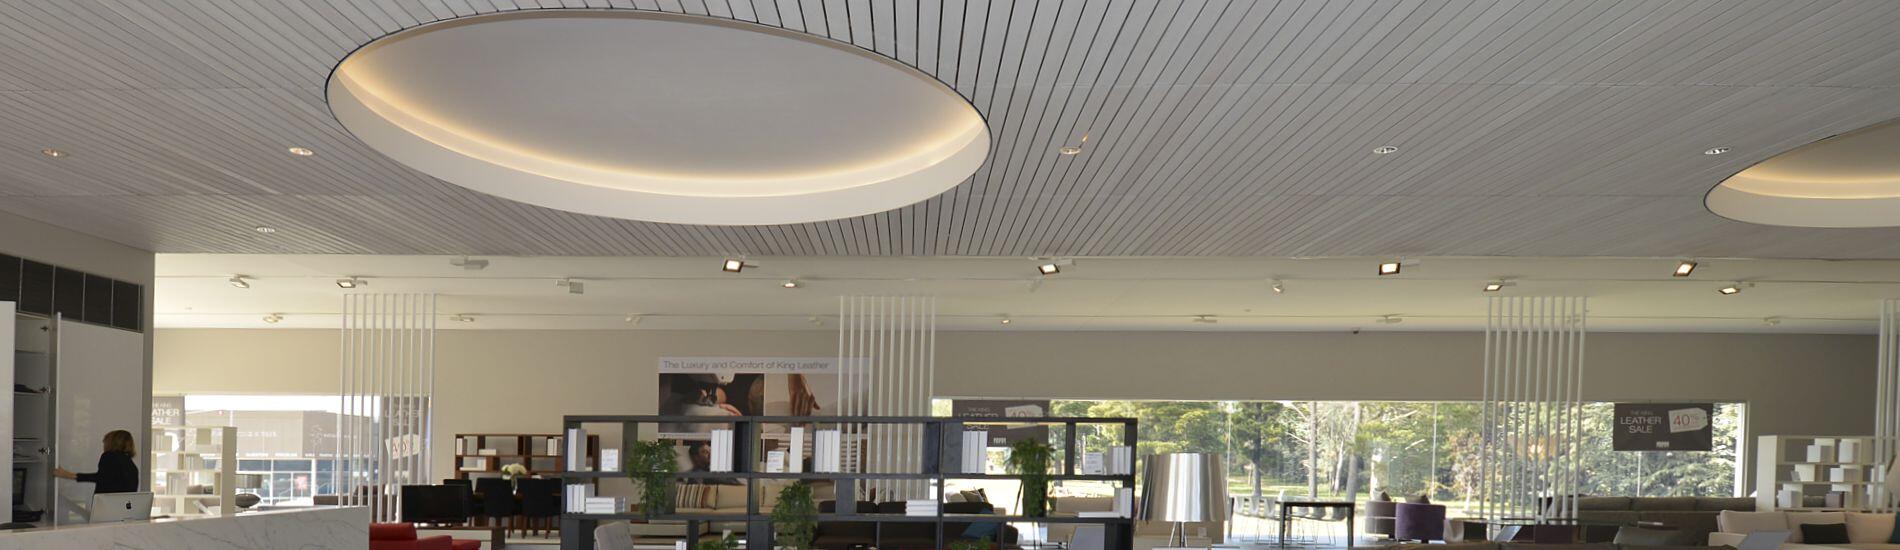 DRIFTWOOD Rustic Timber Slatted Ceiling Denotes Sophisticated Retail Interior Branding